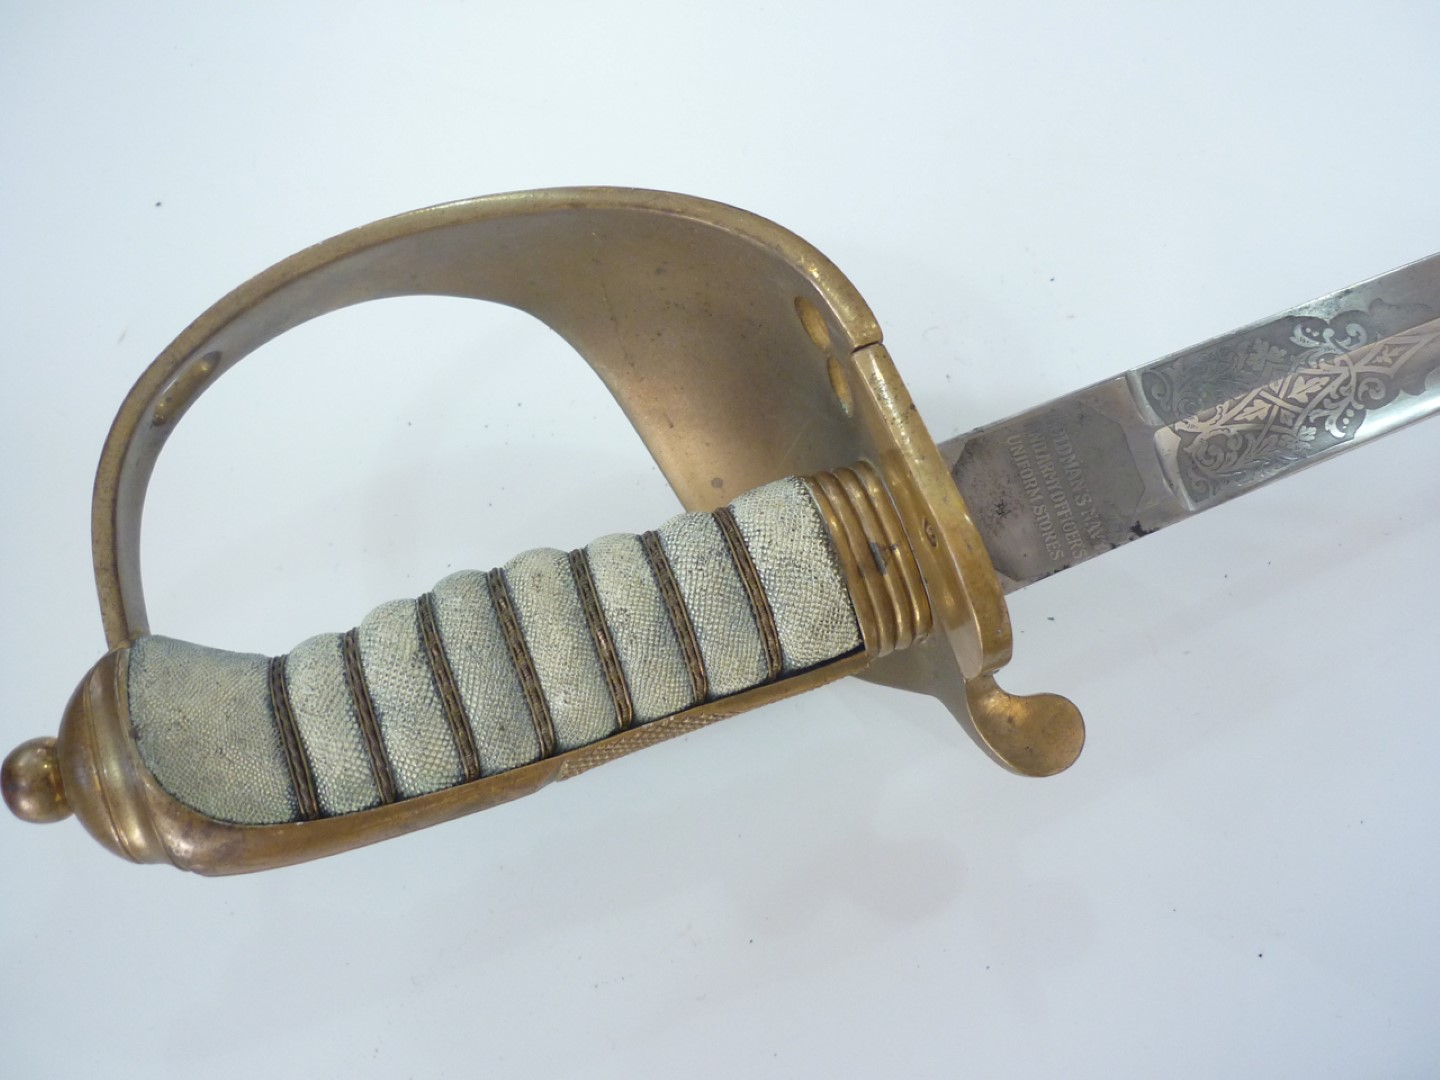 An early 20th Century Royal Navy officer's sword by Goodman's Navy and Army Officers' Uniform - Image 3 of 4